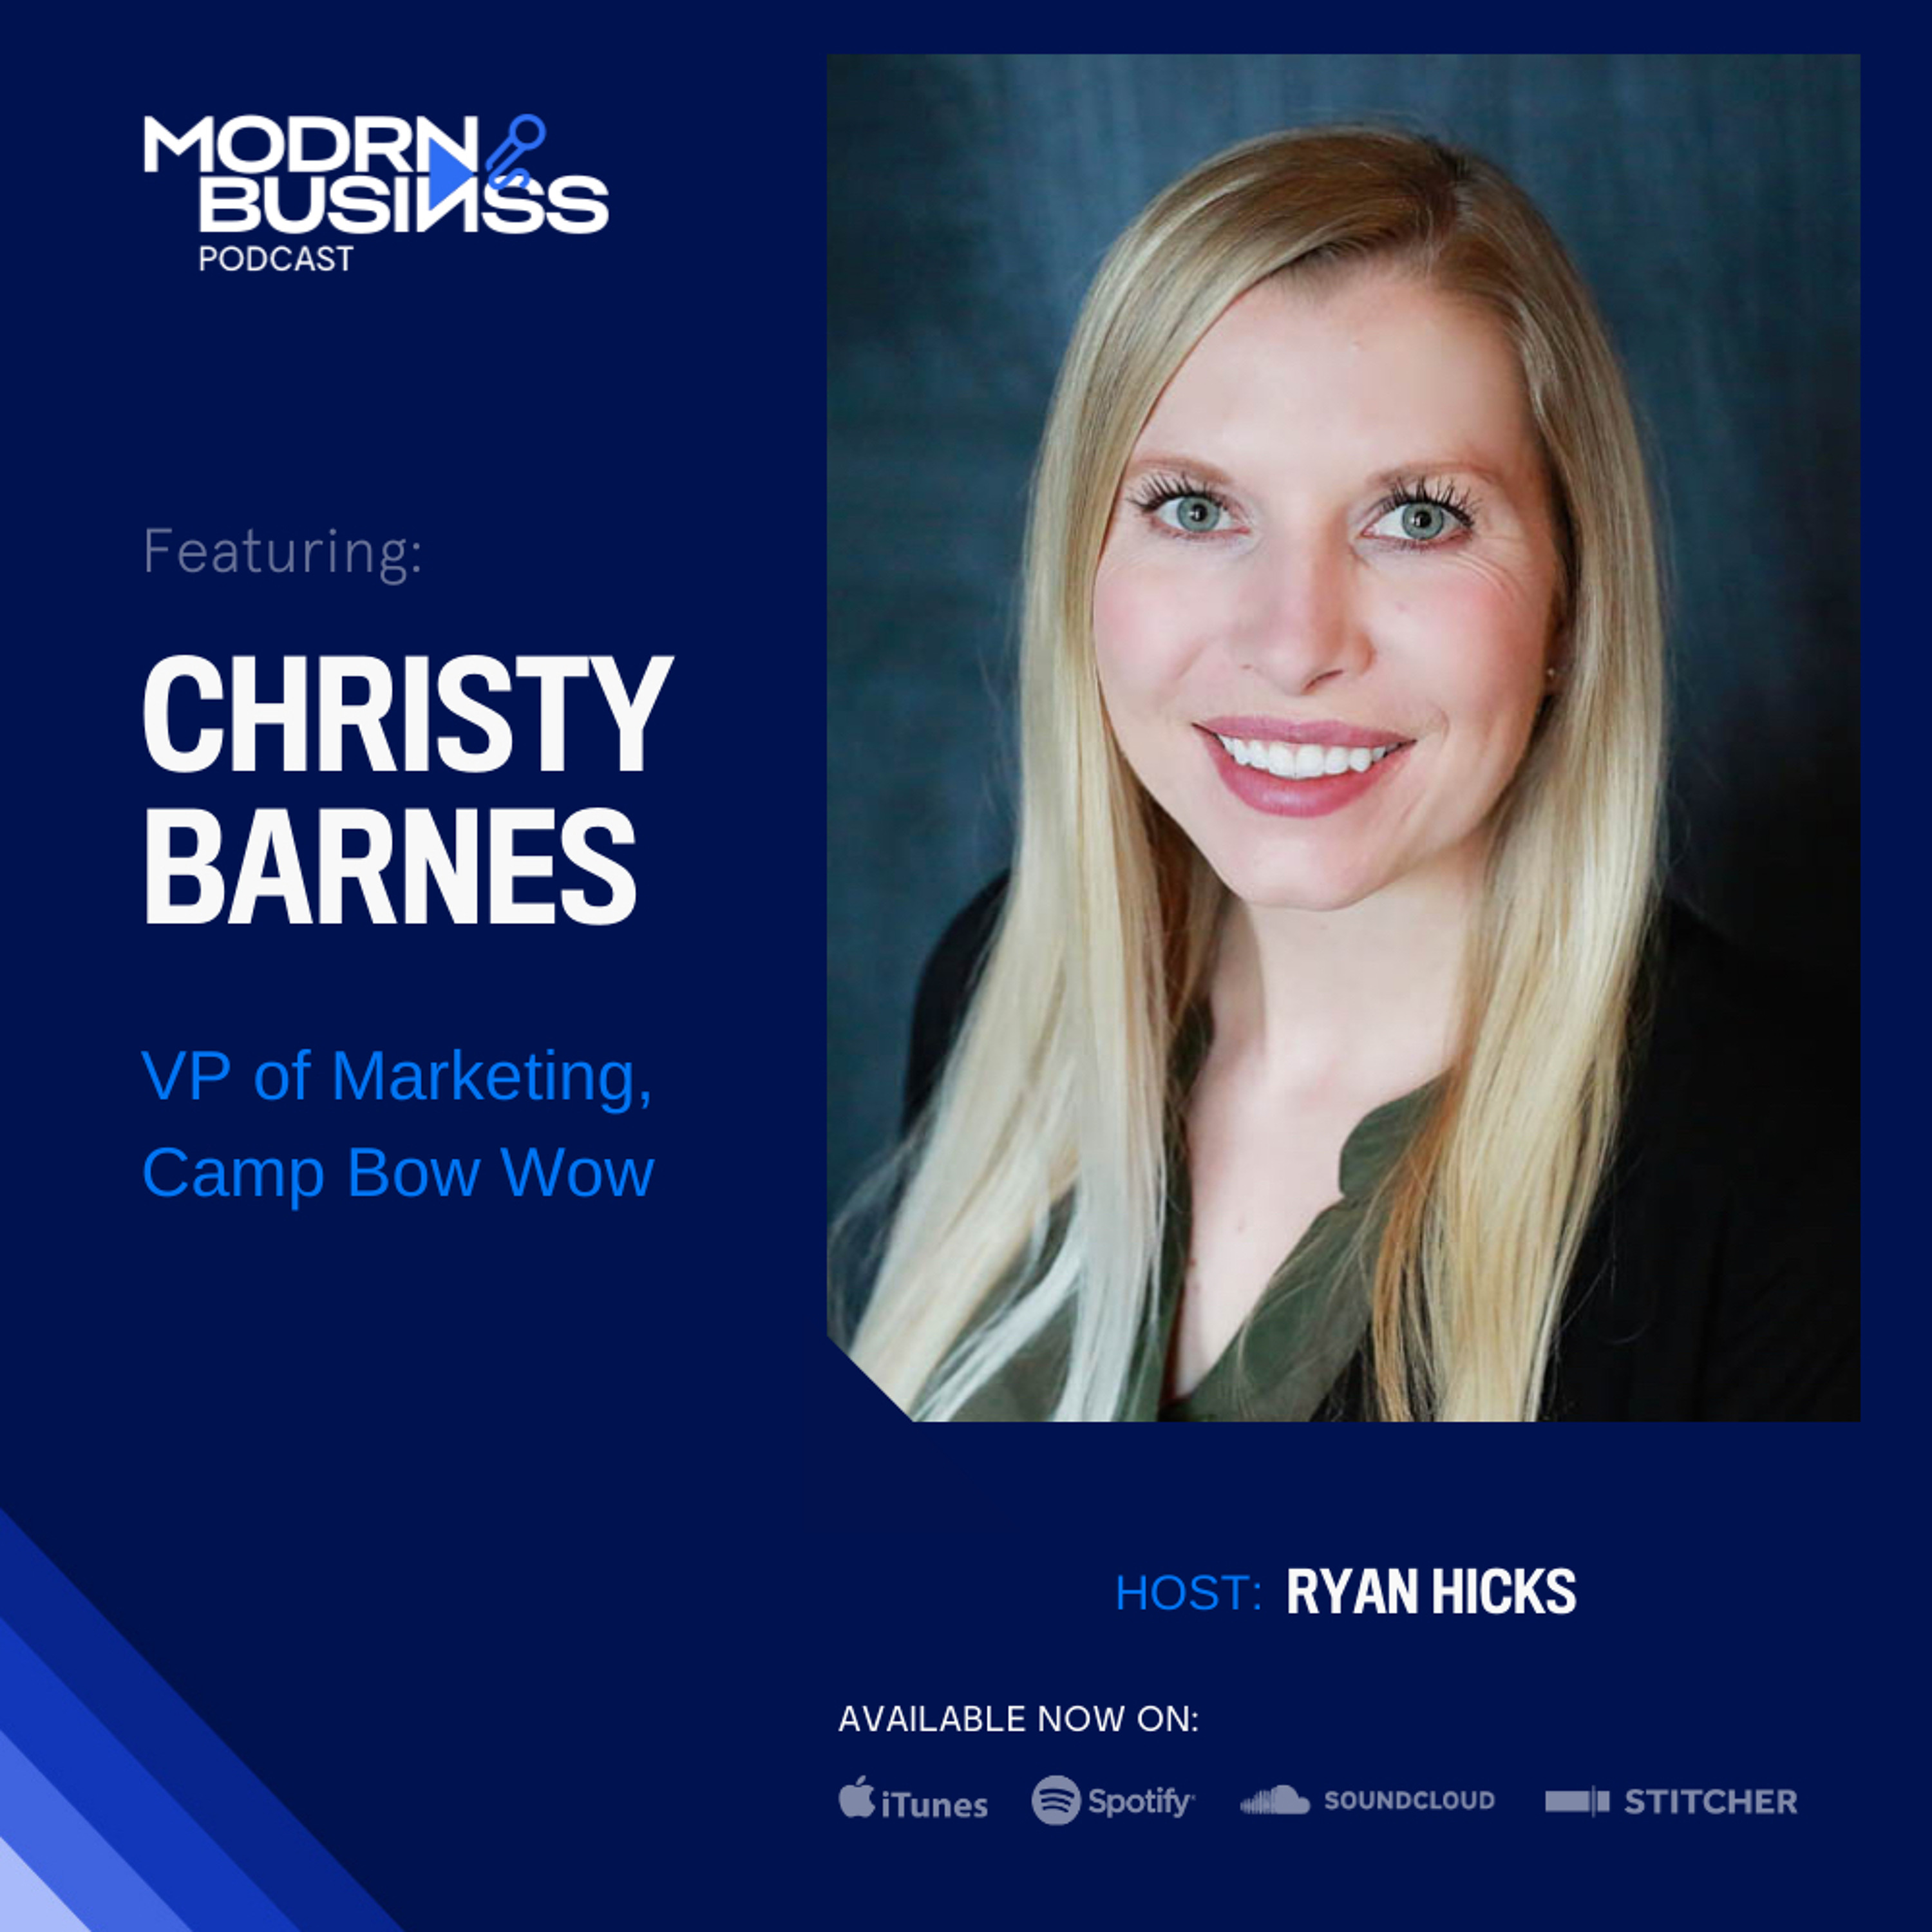 Christy Barnes, VP of Marketing of Camp Bow Wow